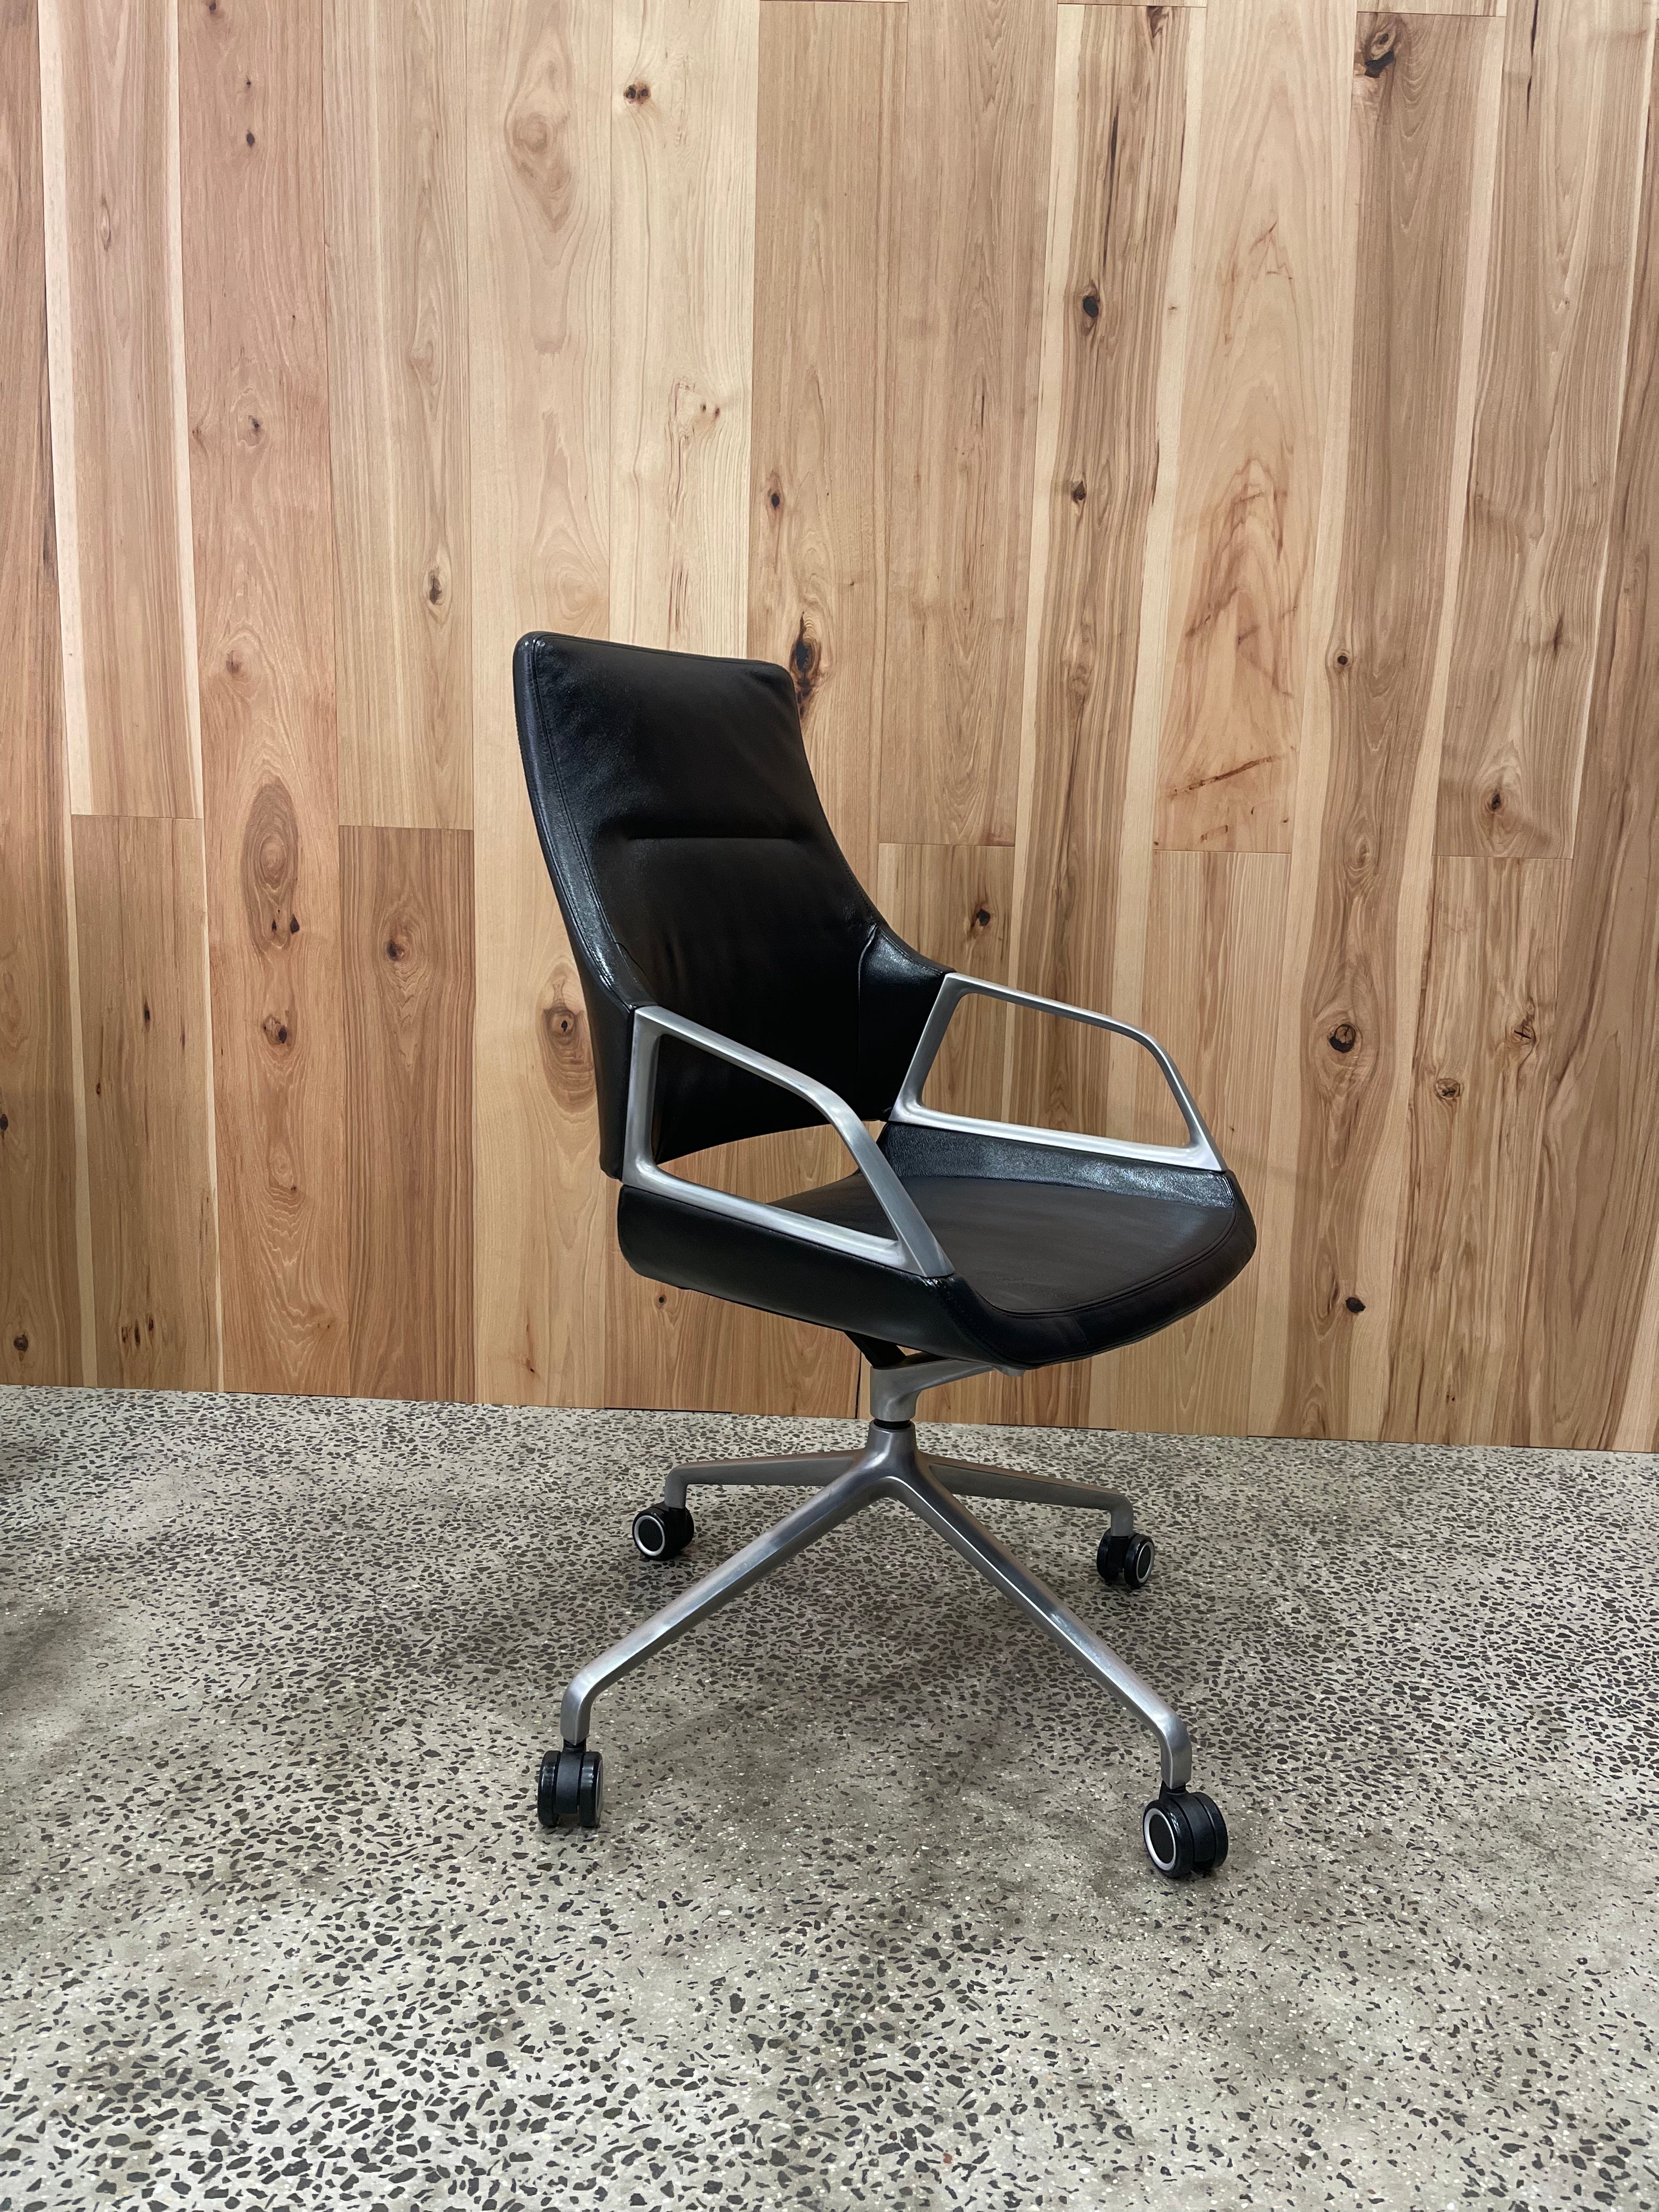 Wilkhahn Graph Chair Made in Germany Genuine Executive Management w/ Caster Wheels